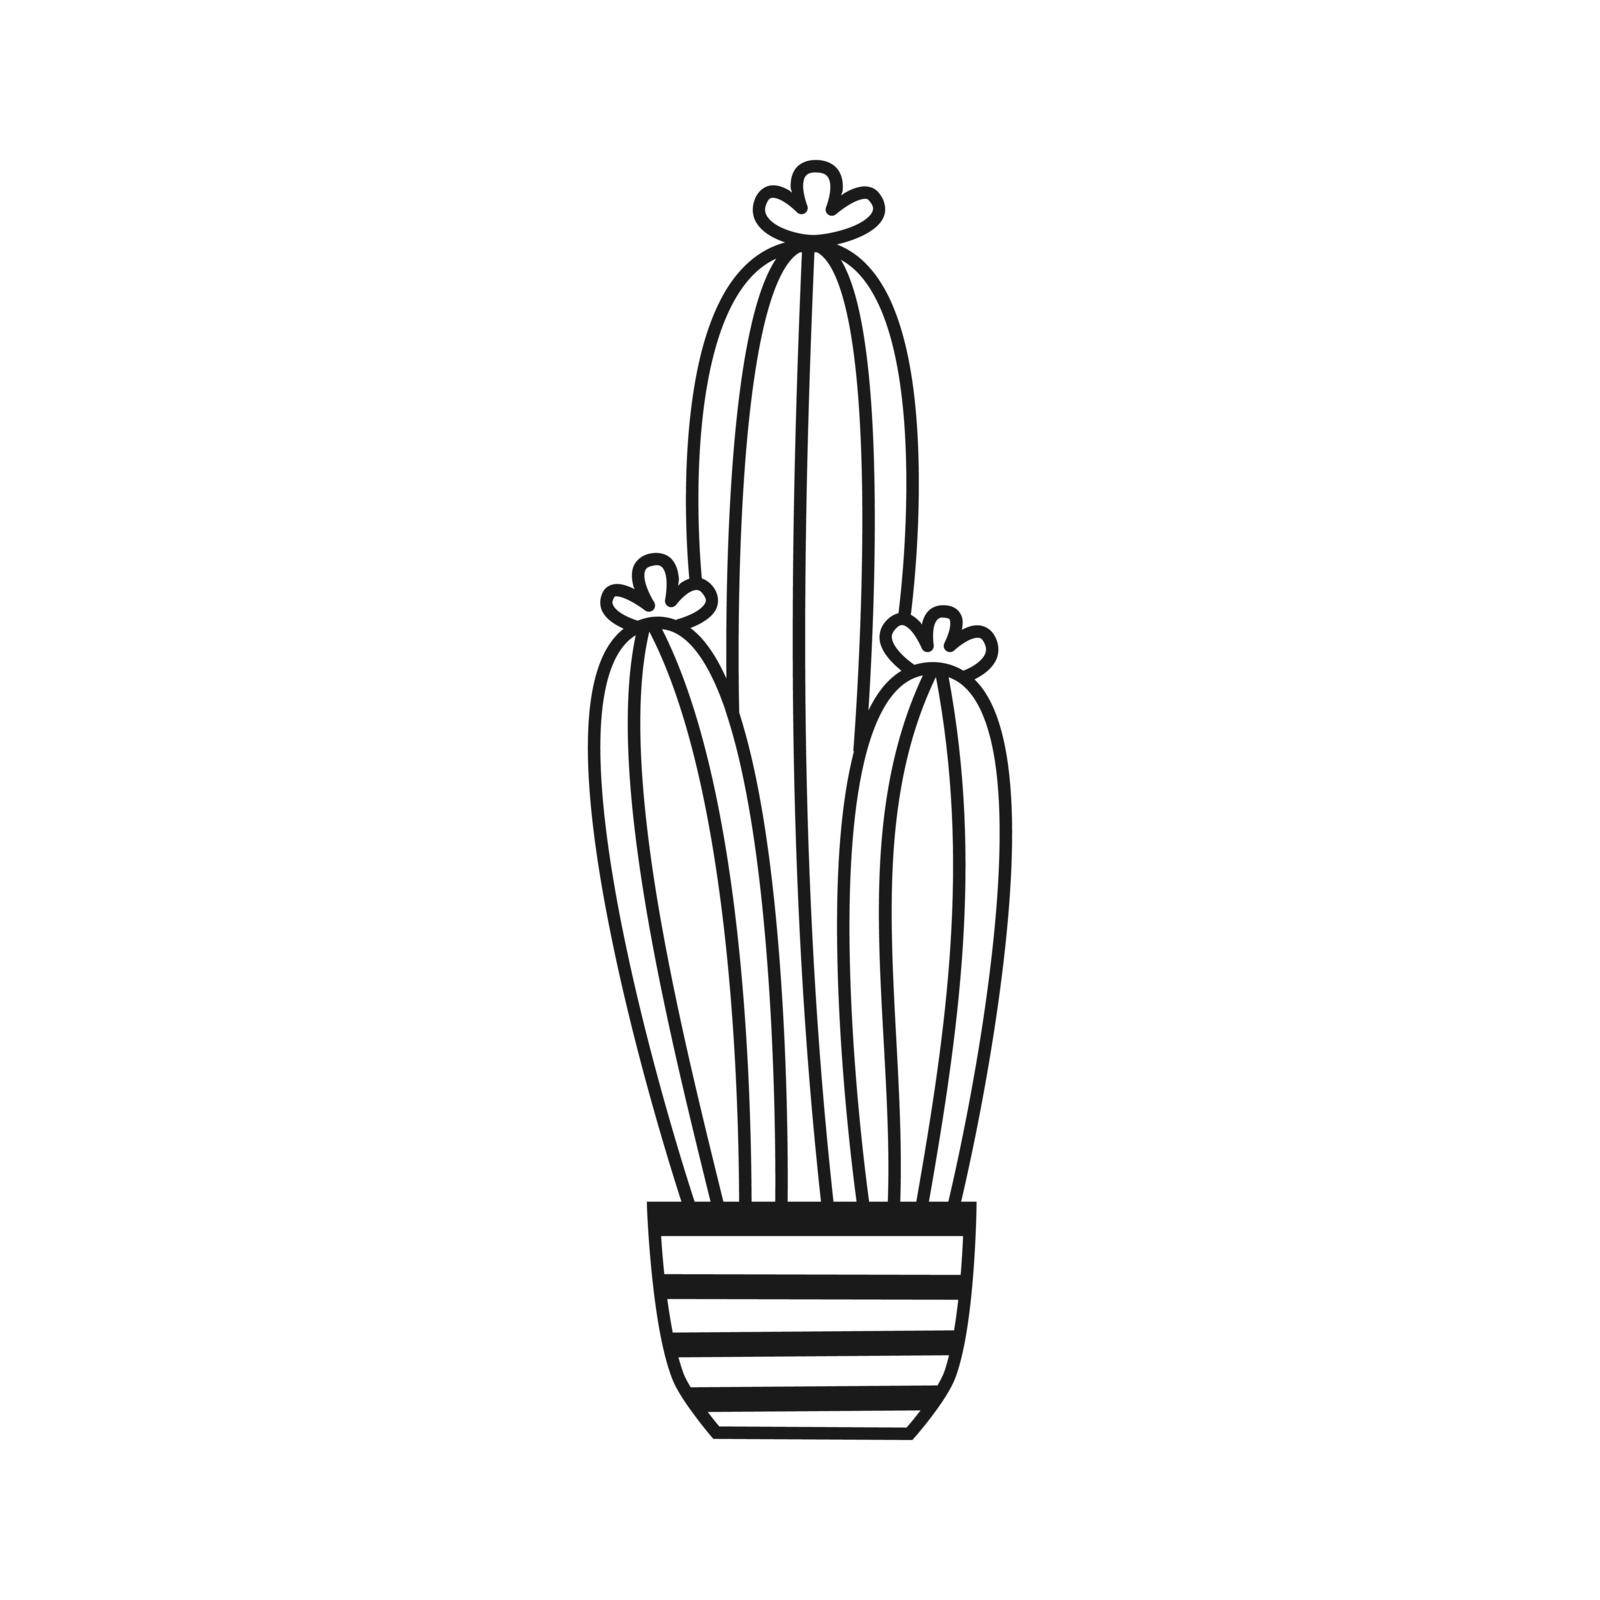 Potted cactus Vector outline illustration drawings on a white background by DaryaKuznetsova